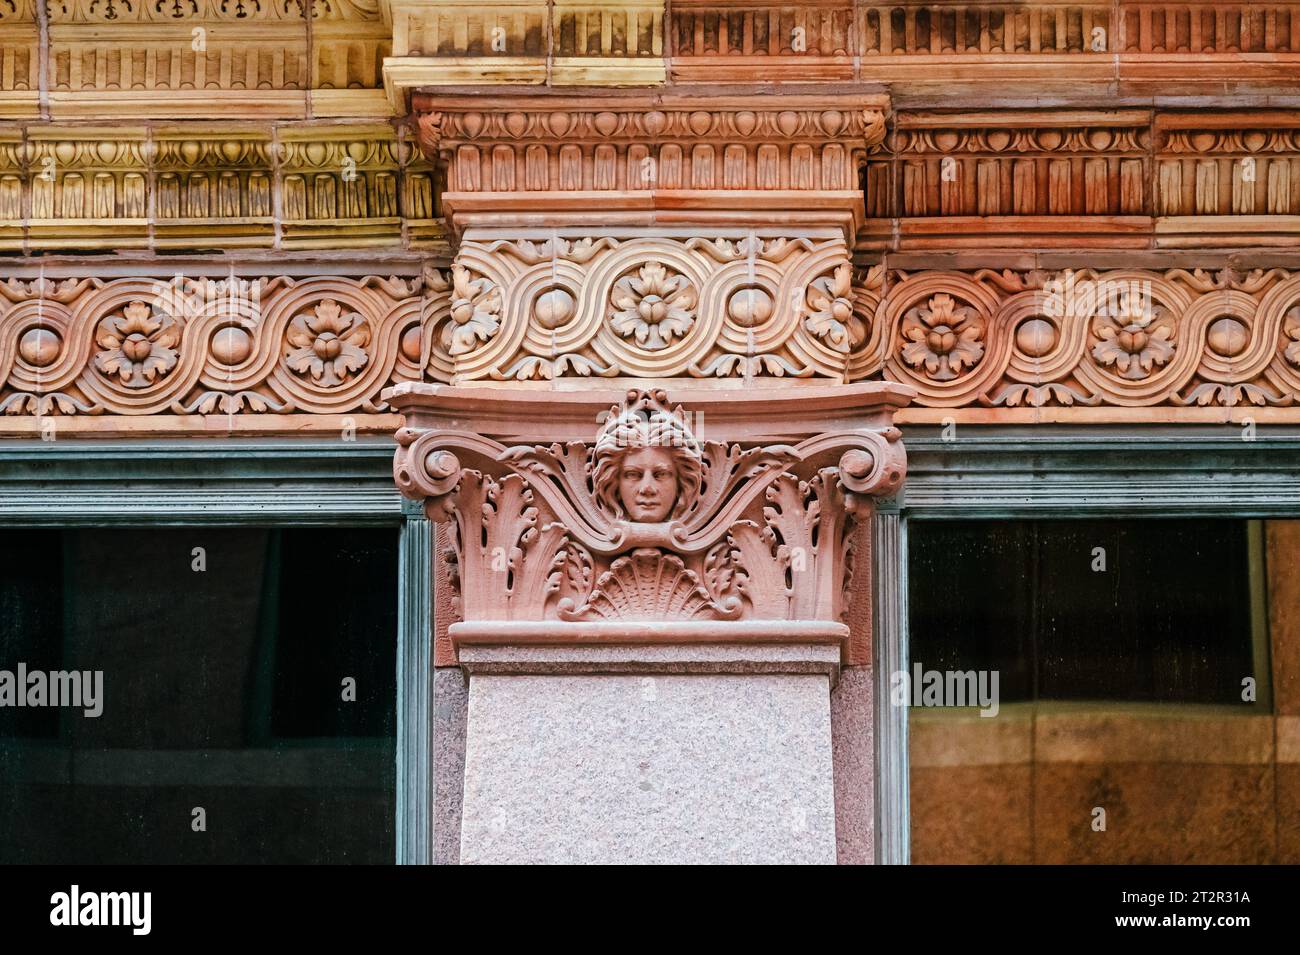 Toronto, Canada, architectural capital in a column of the Hudson Bay building in Yonge St. Intricacy decoration with a small gargoyle sculpture Stock Photo